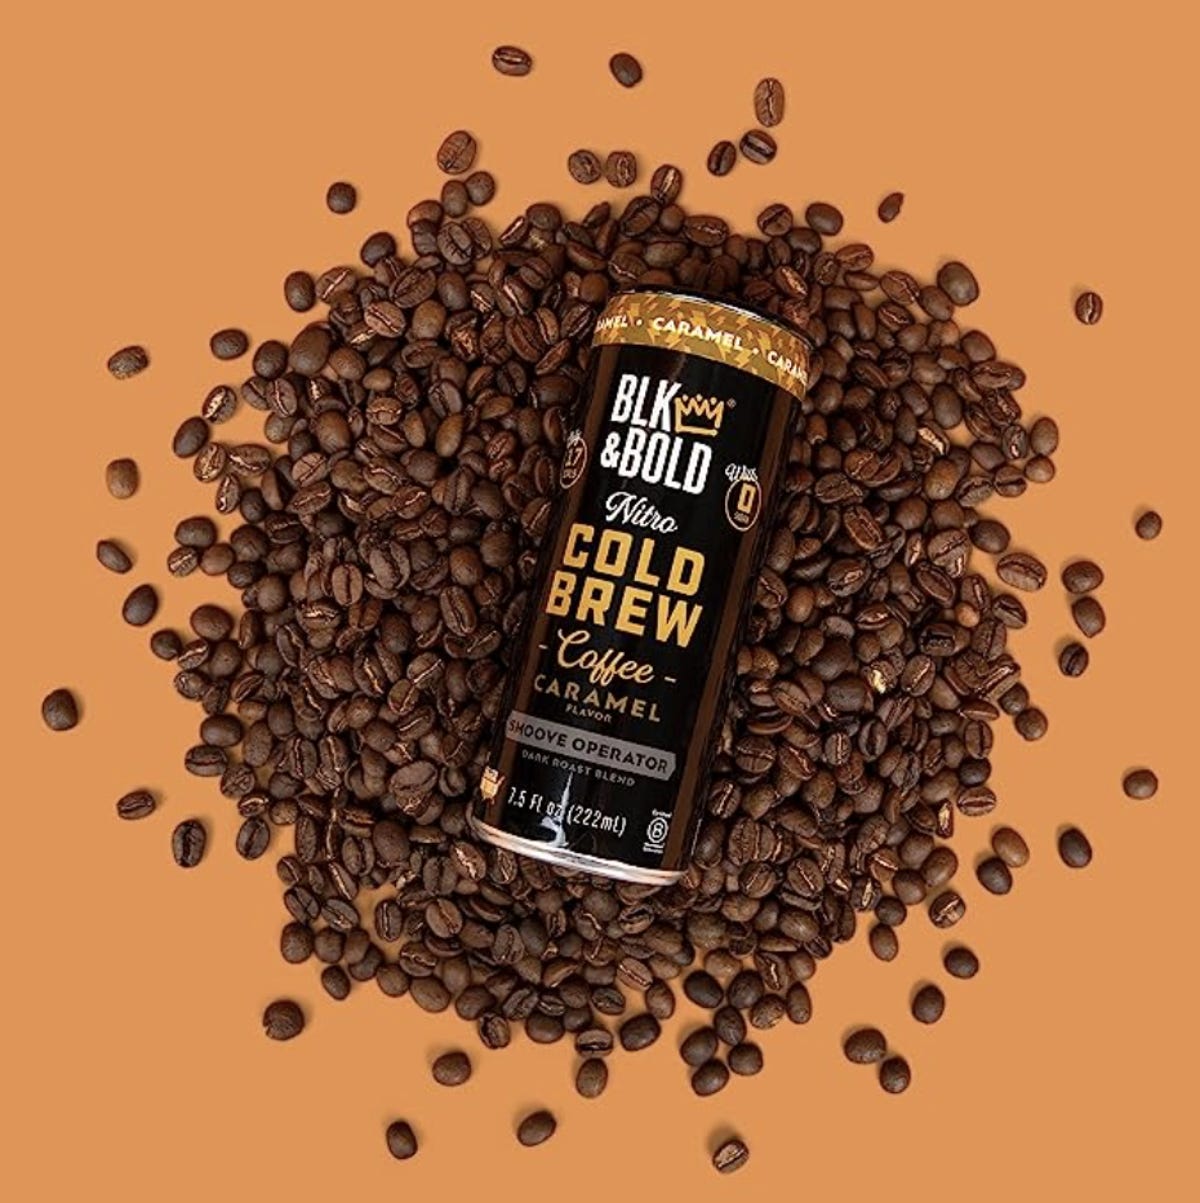 BLK and Bold canned cold brew coffee